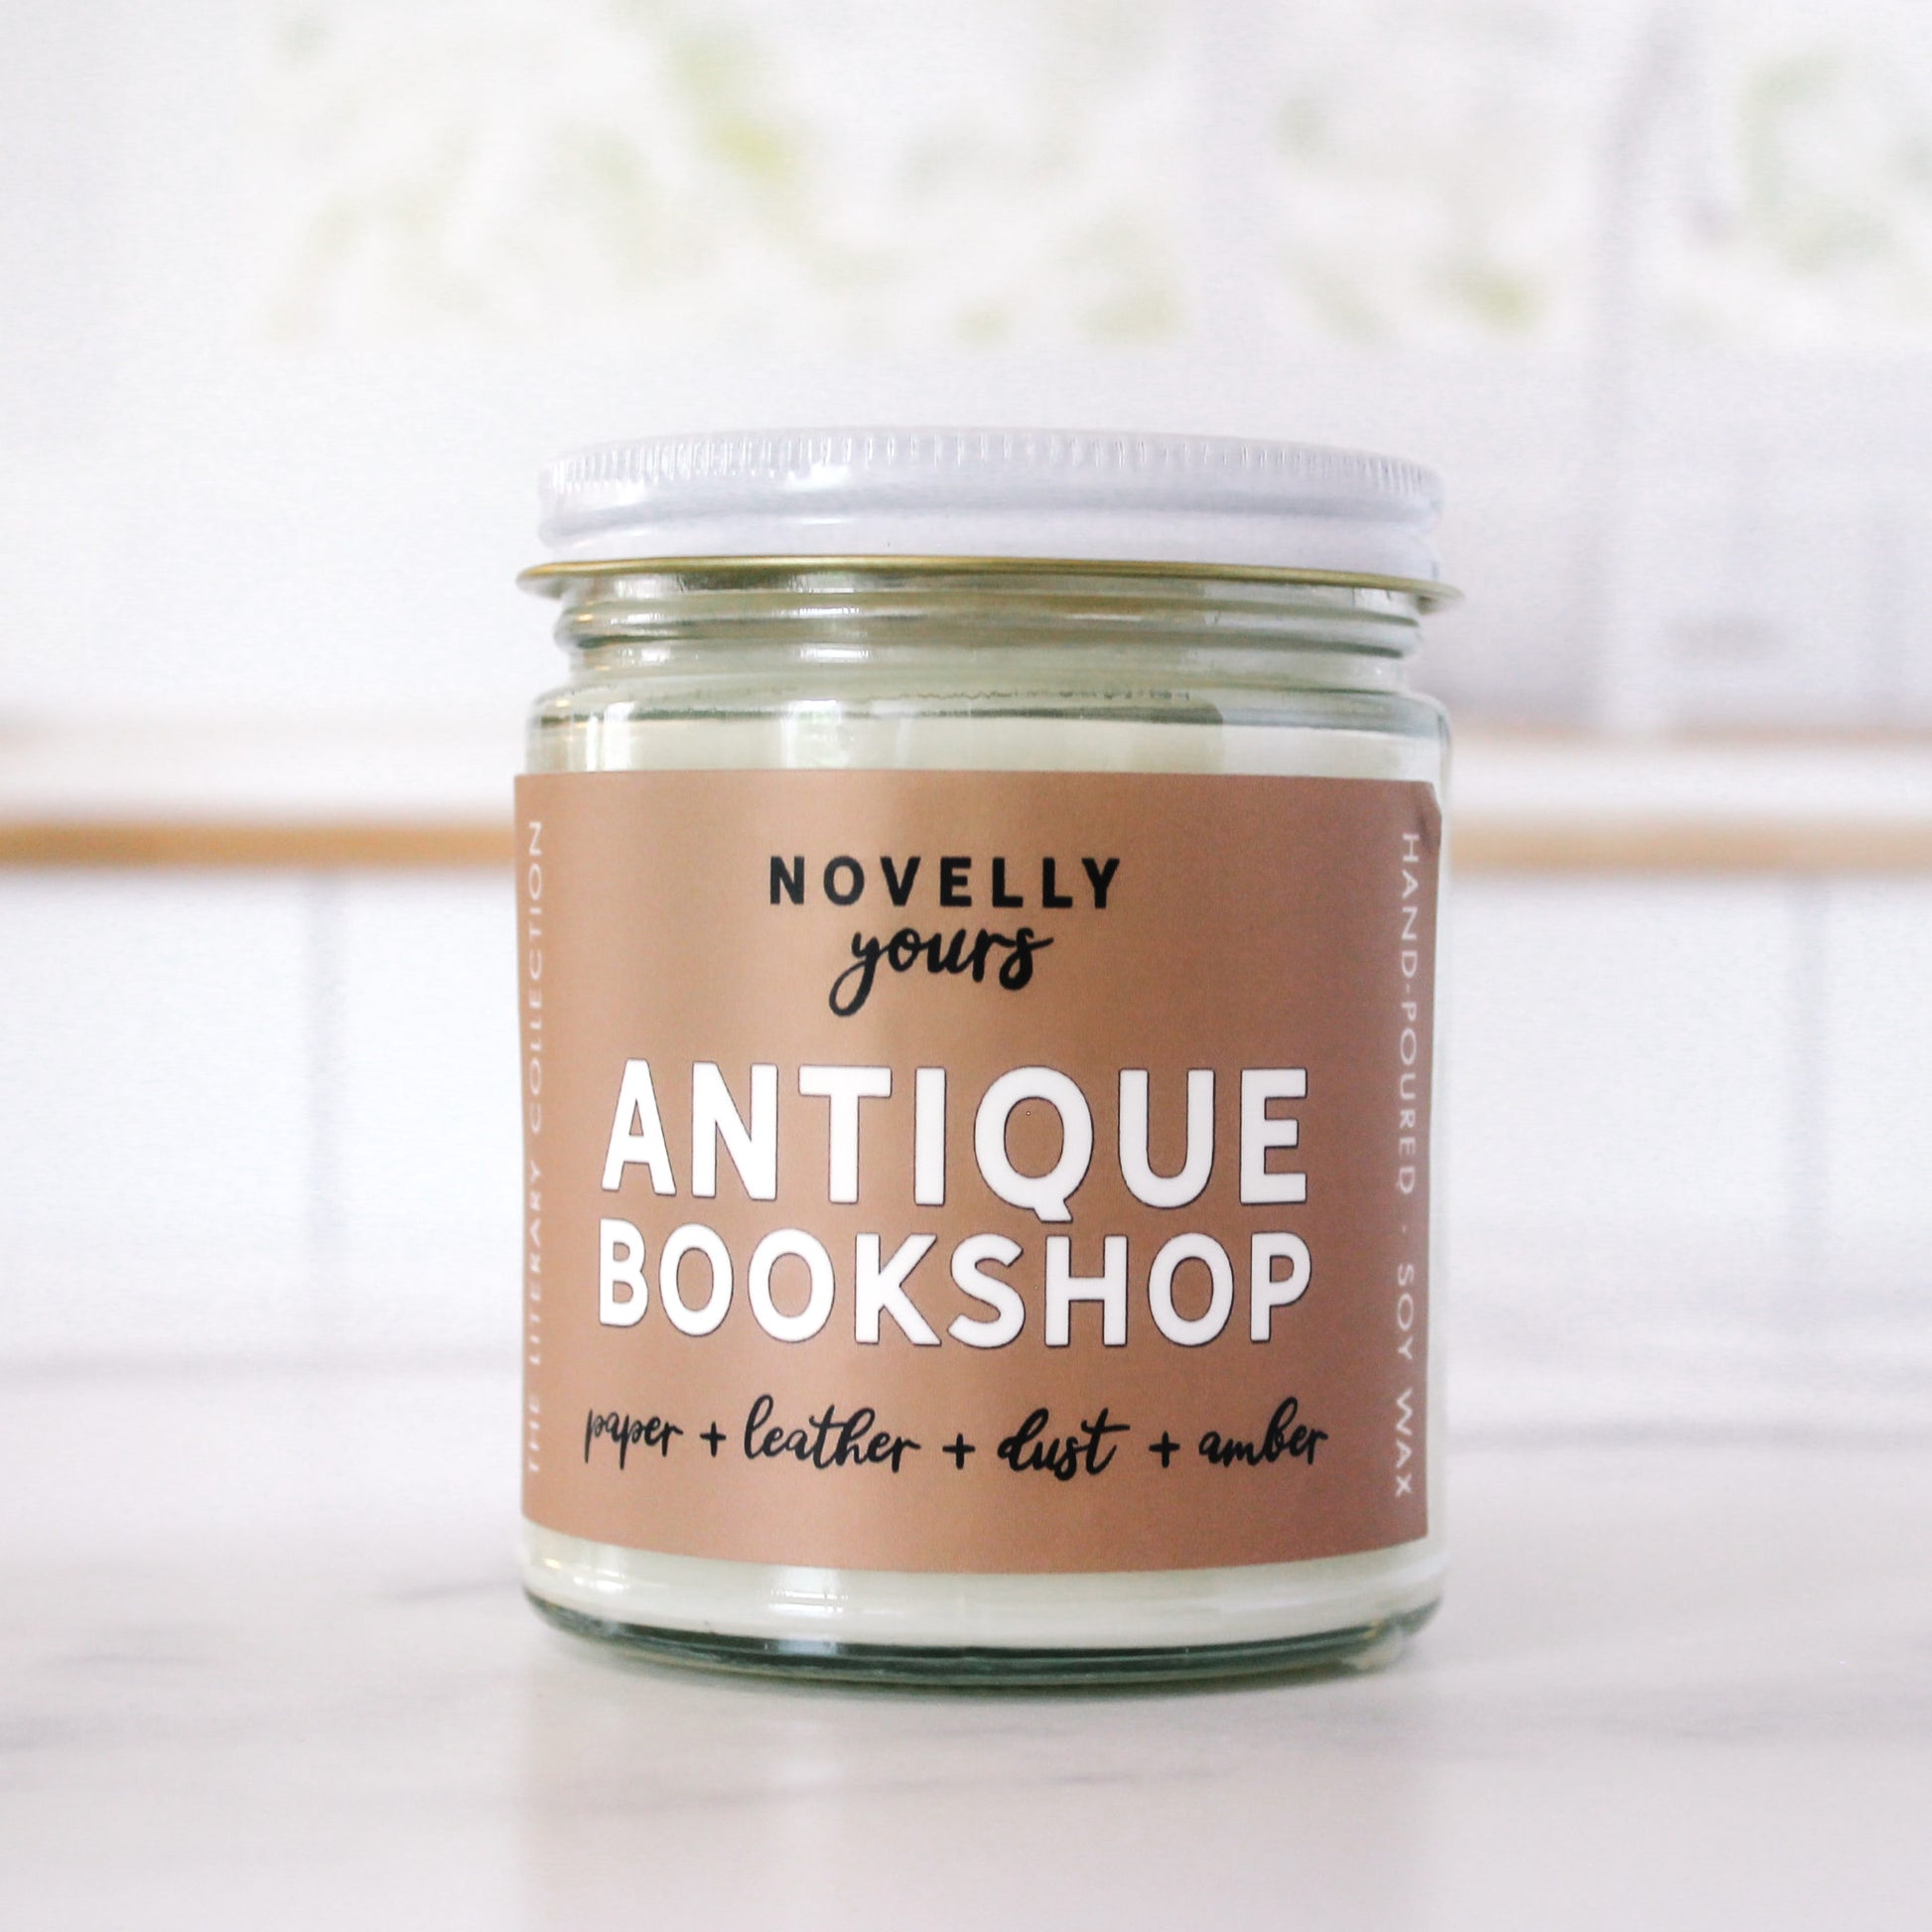 book inspired candle "Antique Bookshop" with beige label sits in front of kitchen background